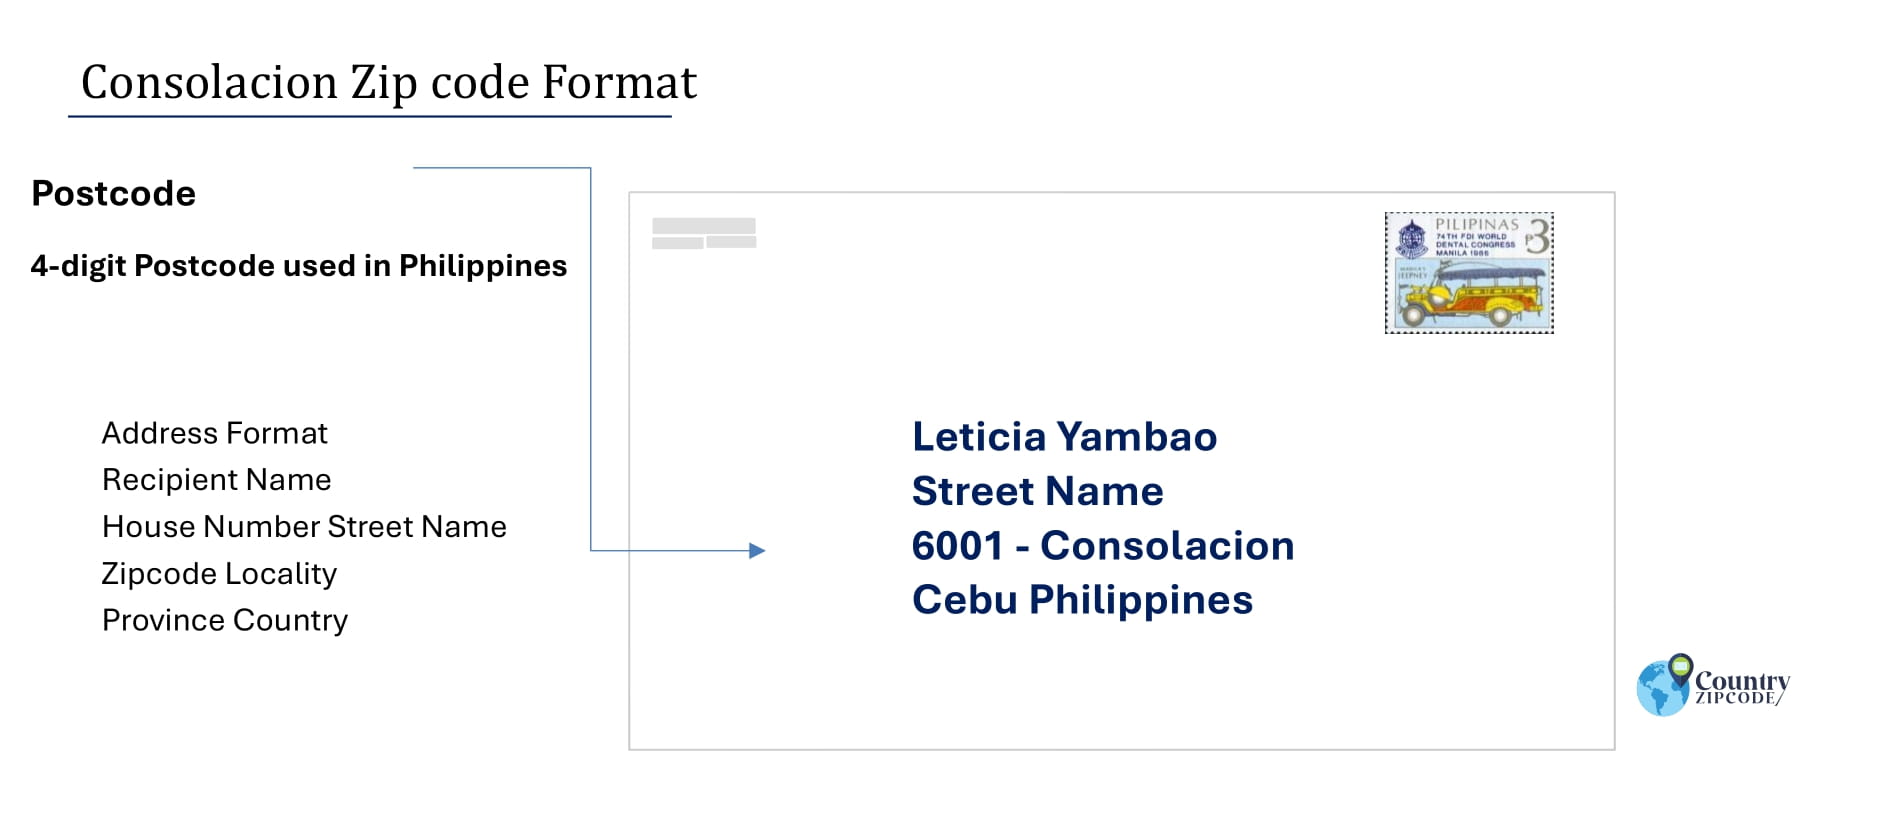 example of Consolacion Philippines zip code and address format